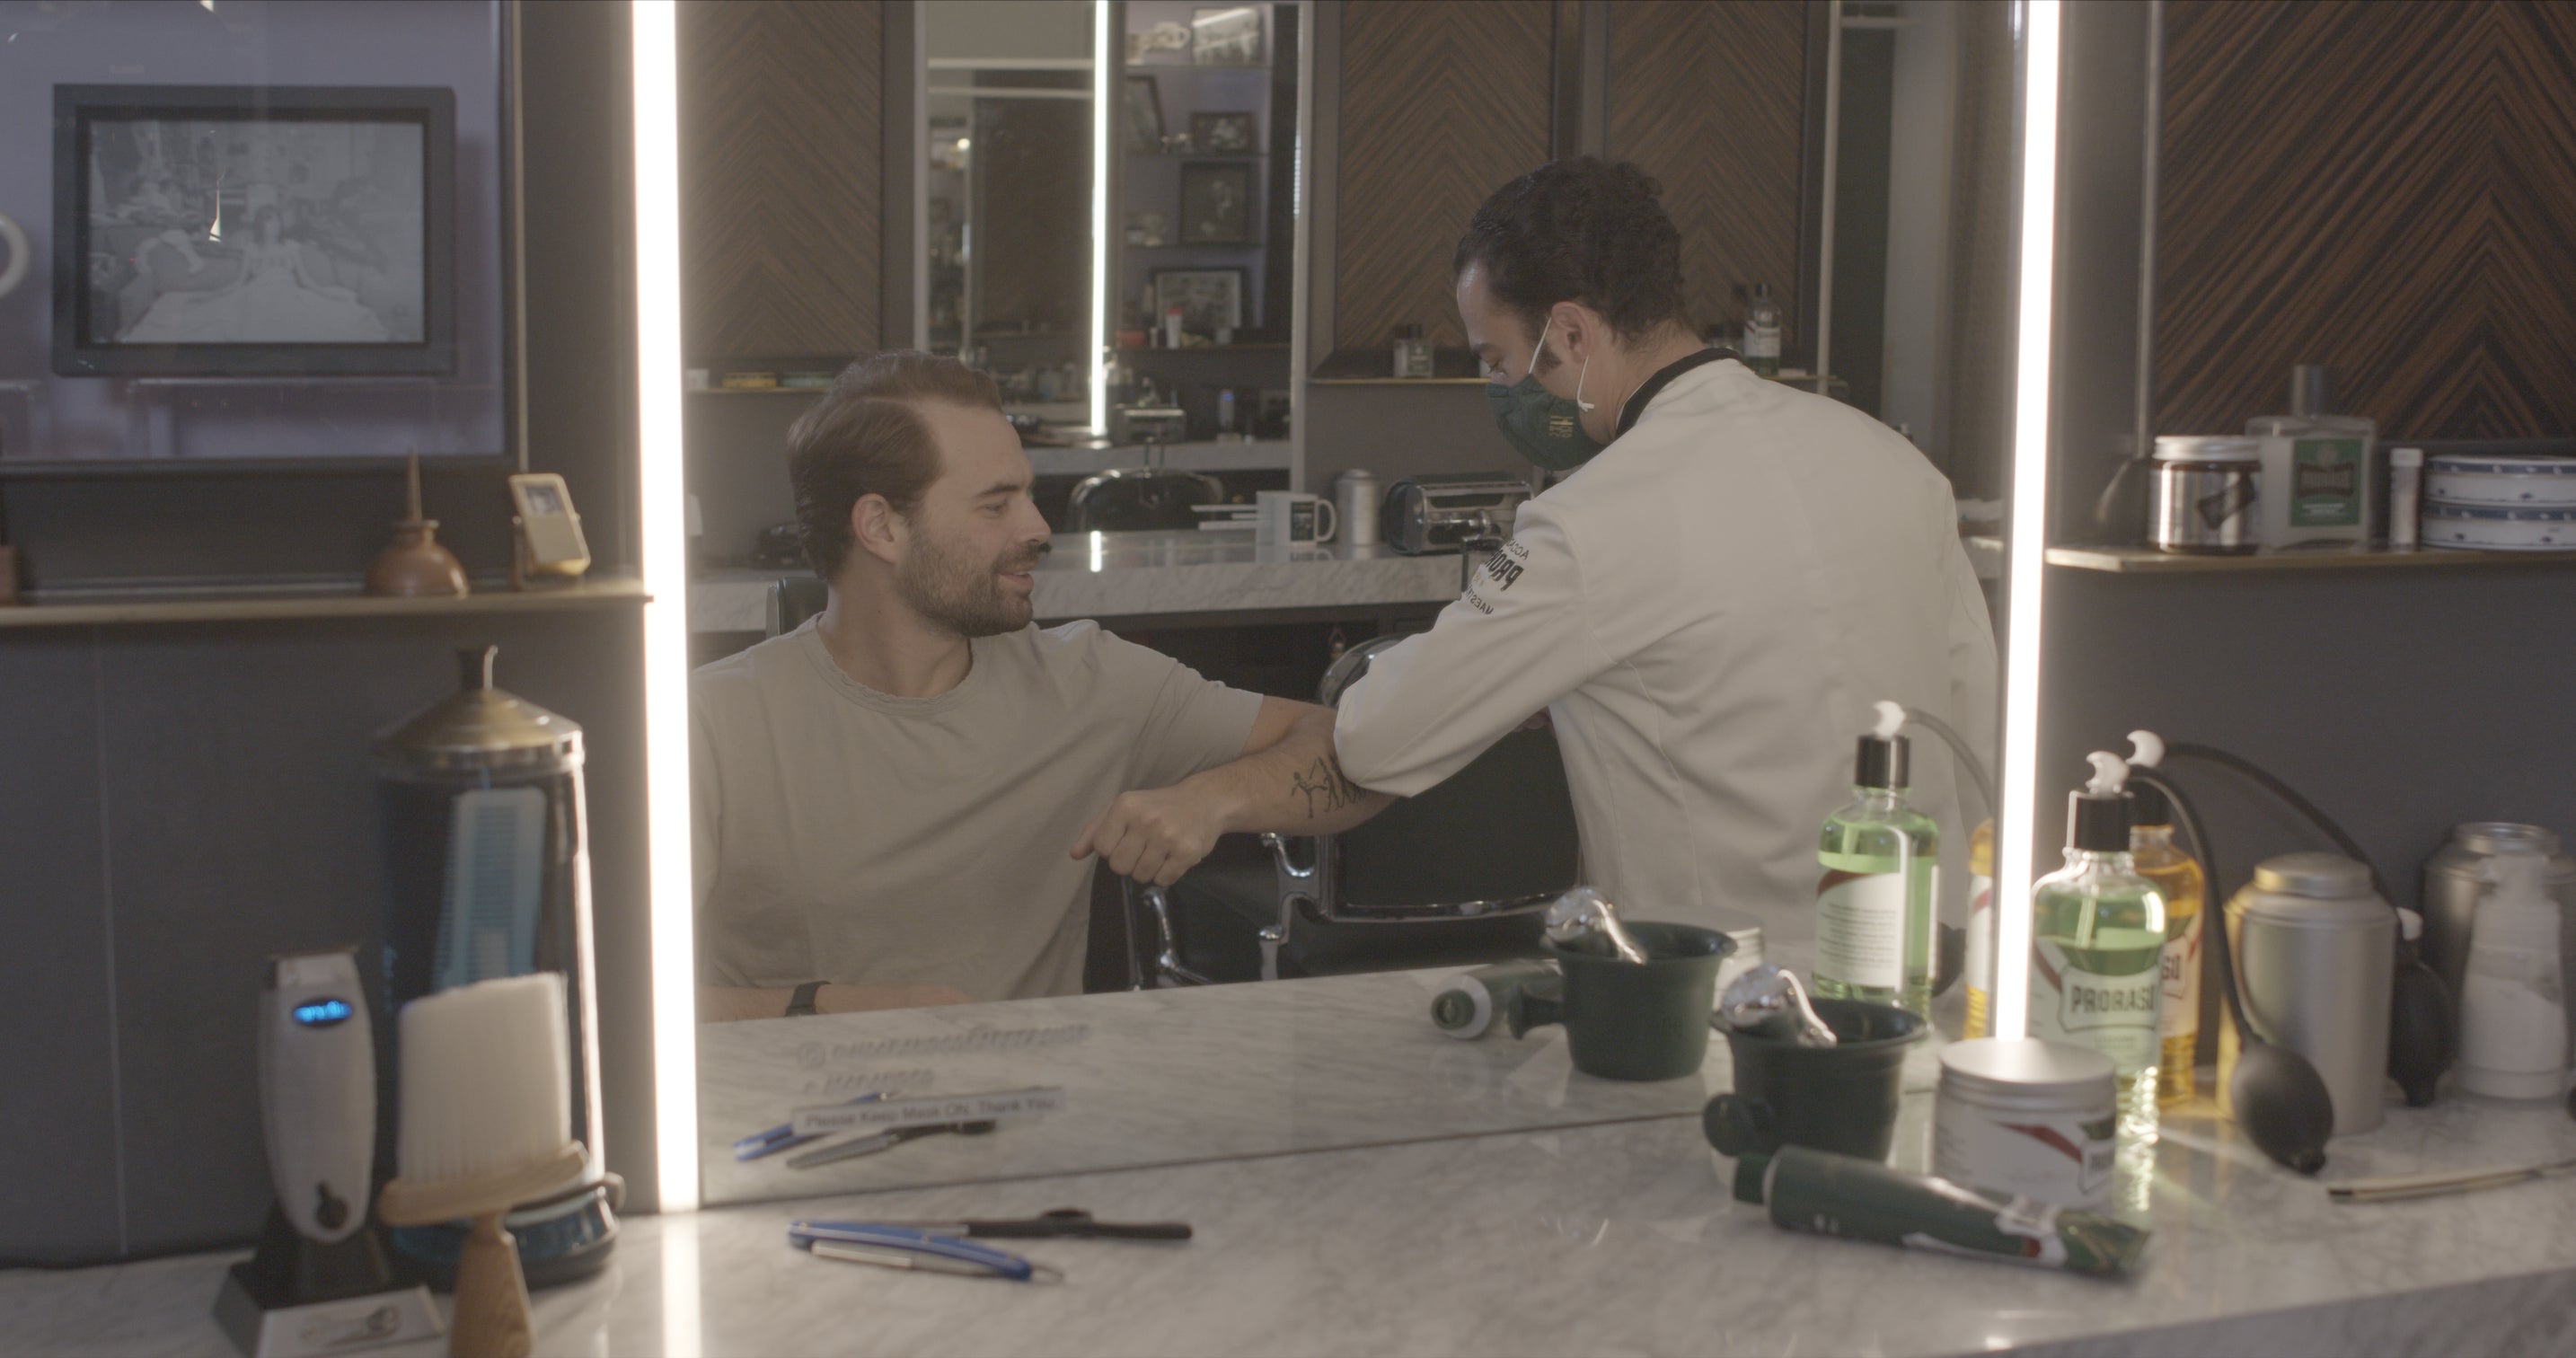 Mike and Alec greeting one another at Haar & co Barbershop